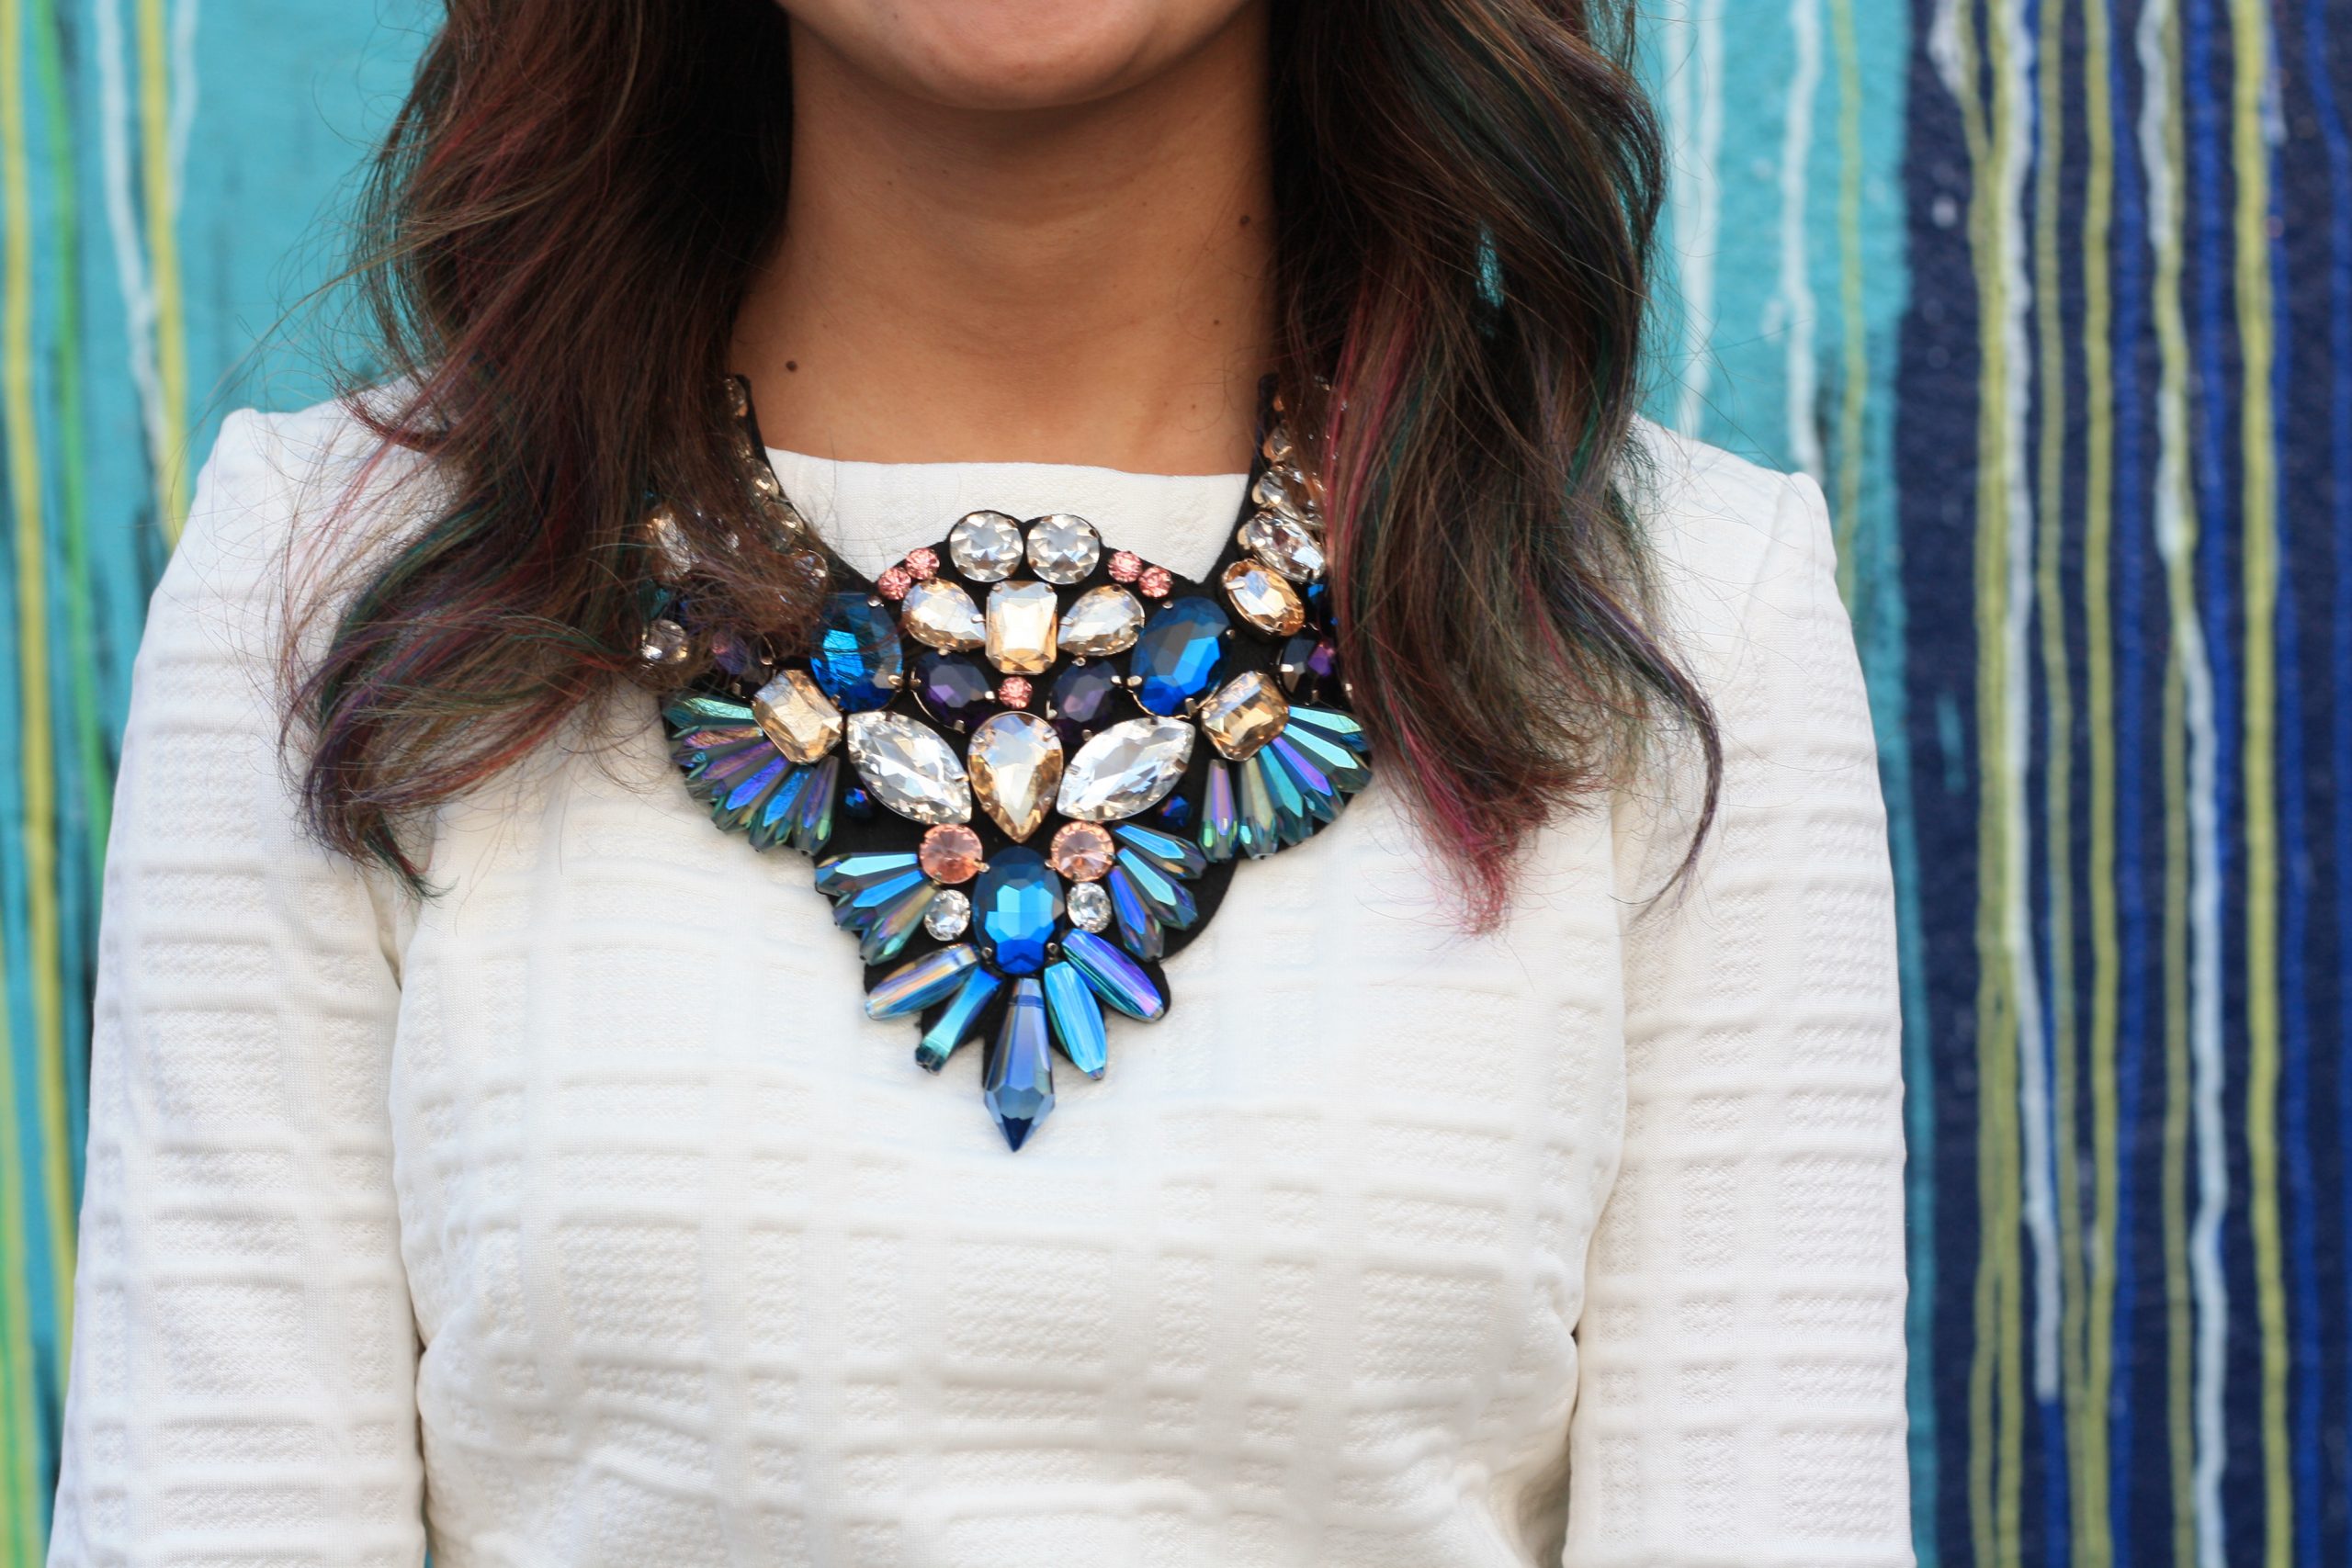 How to Wear a Bib Necklace